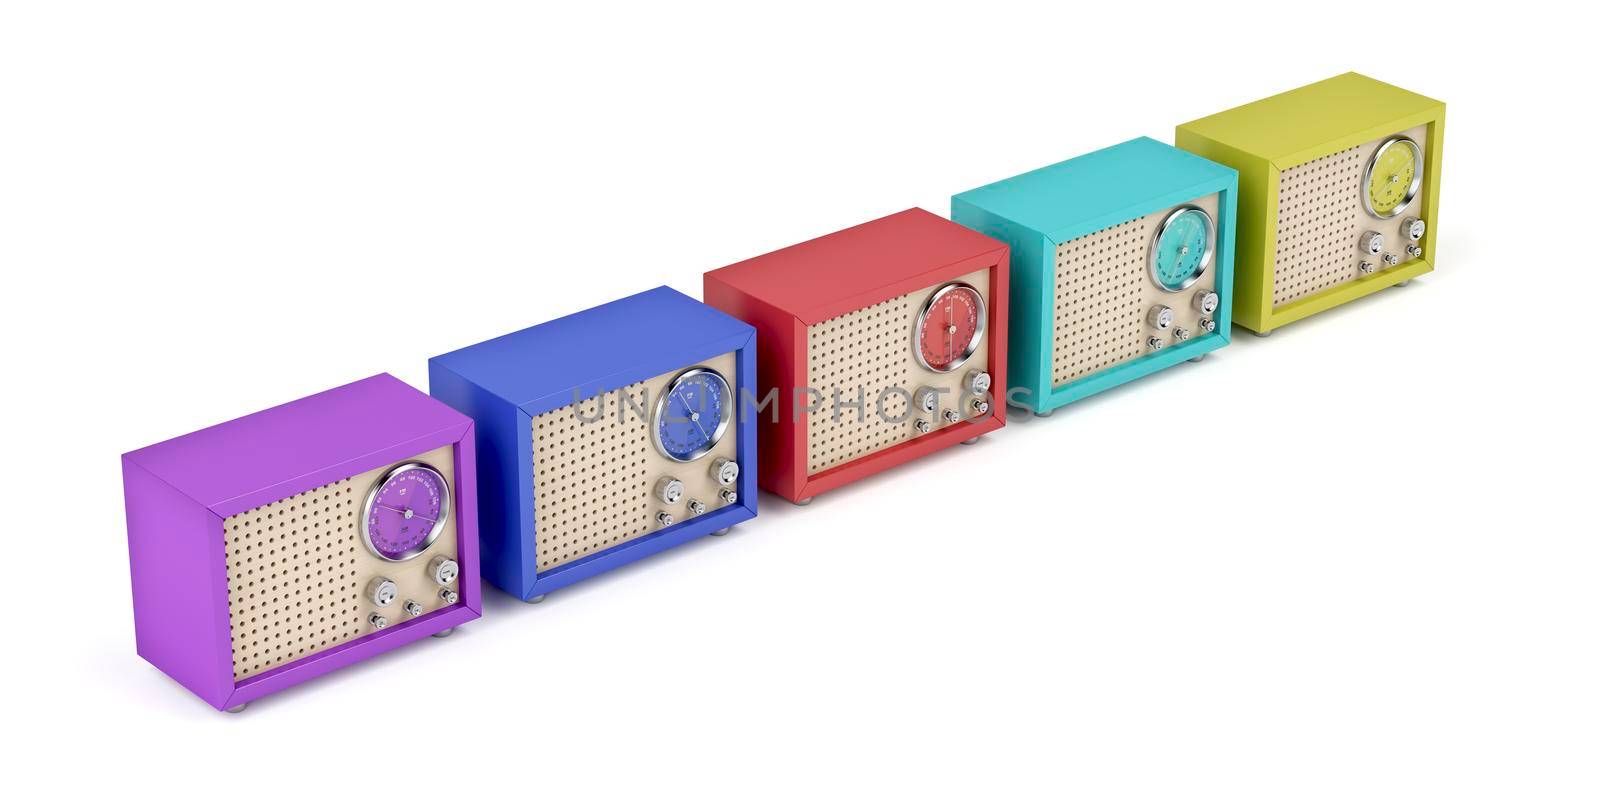 Row with multicolor radios with retro design on white background